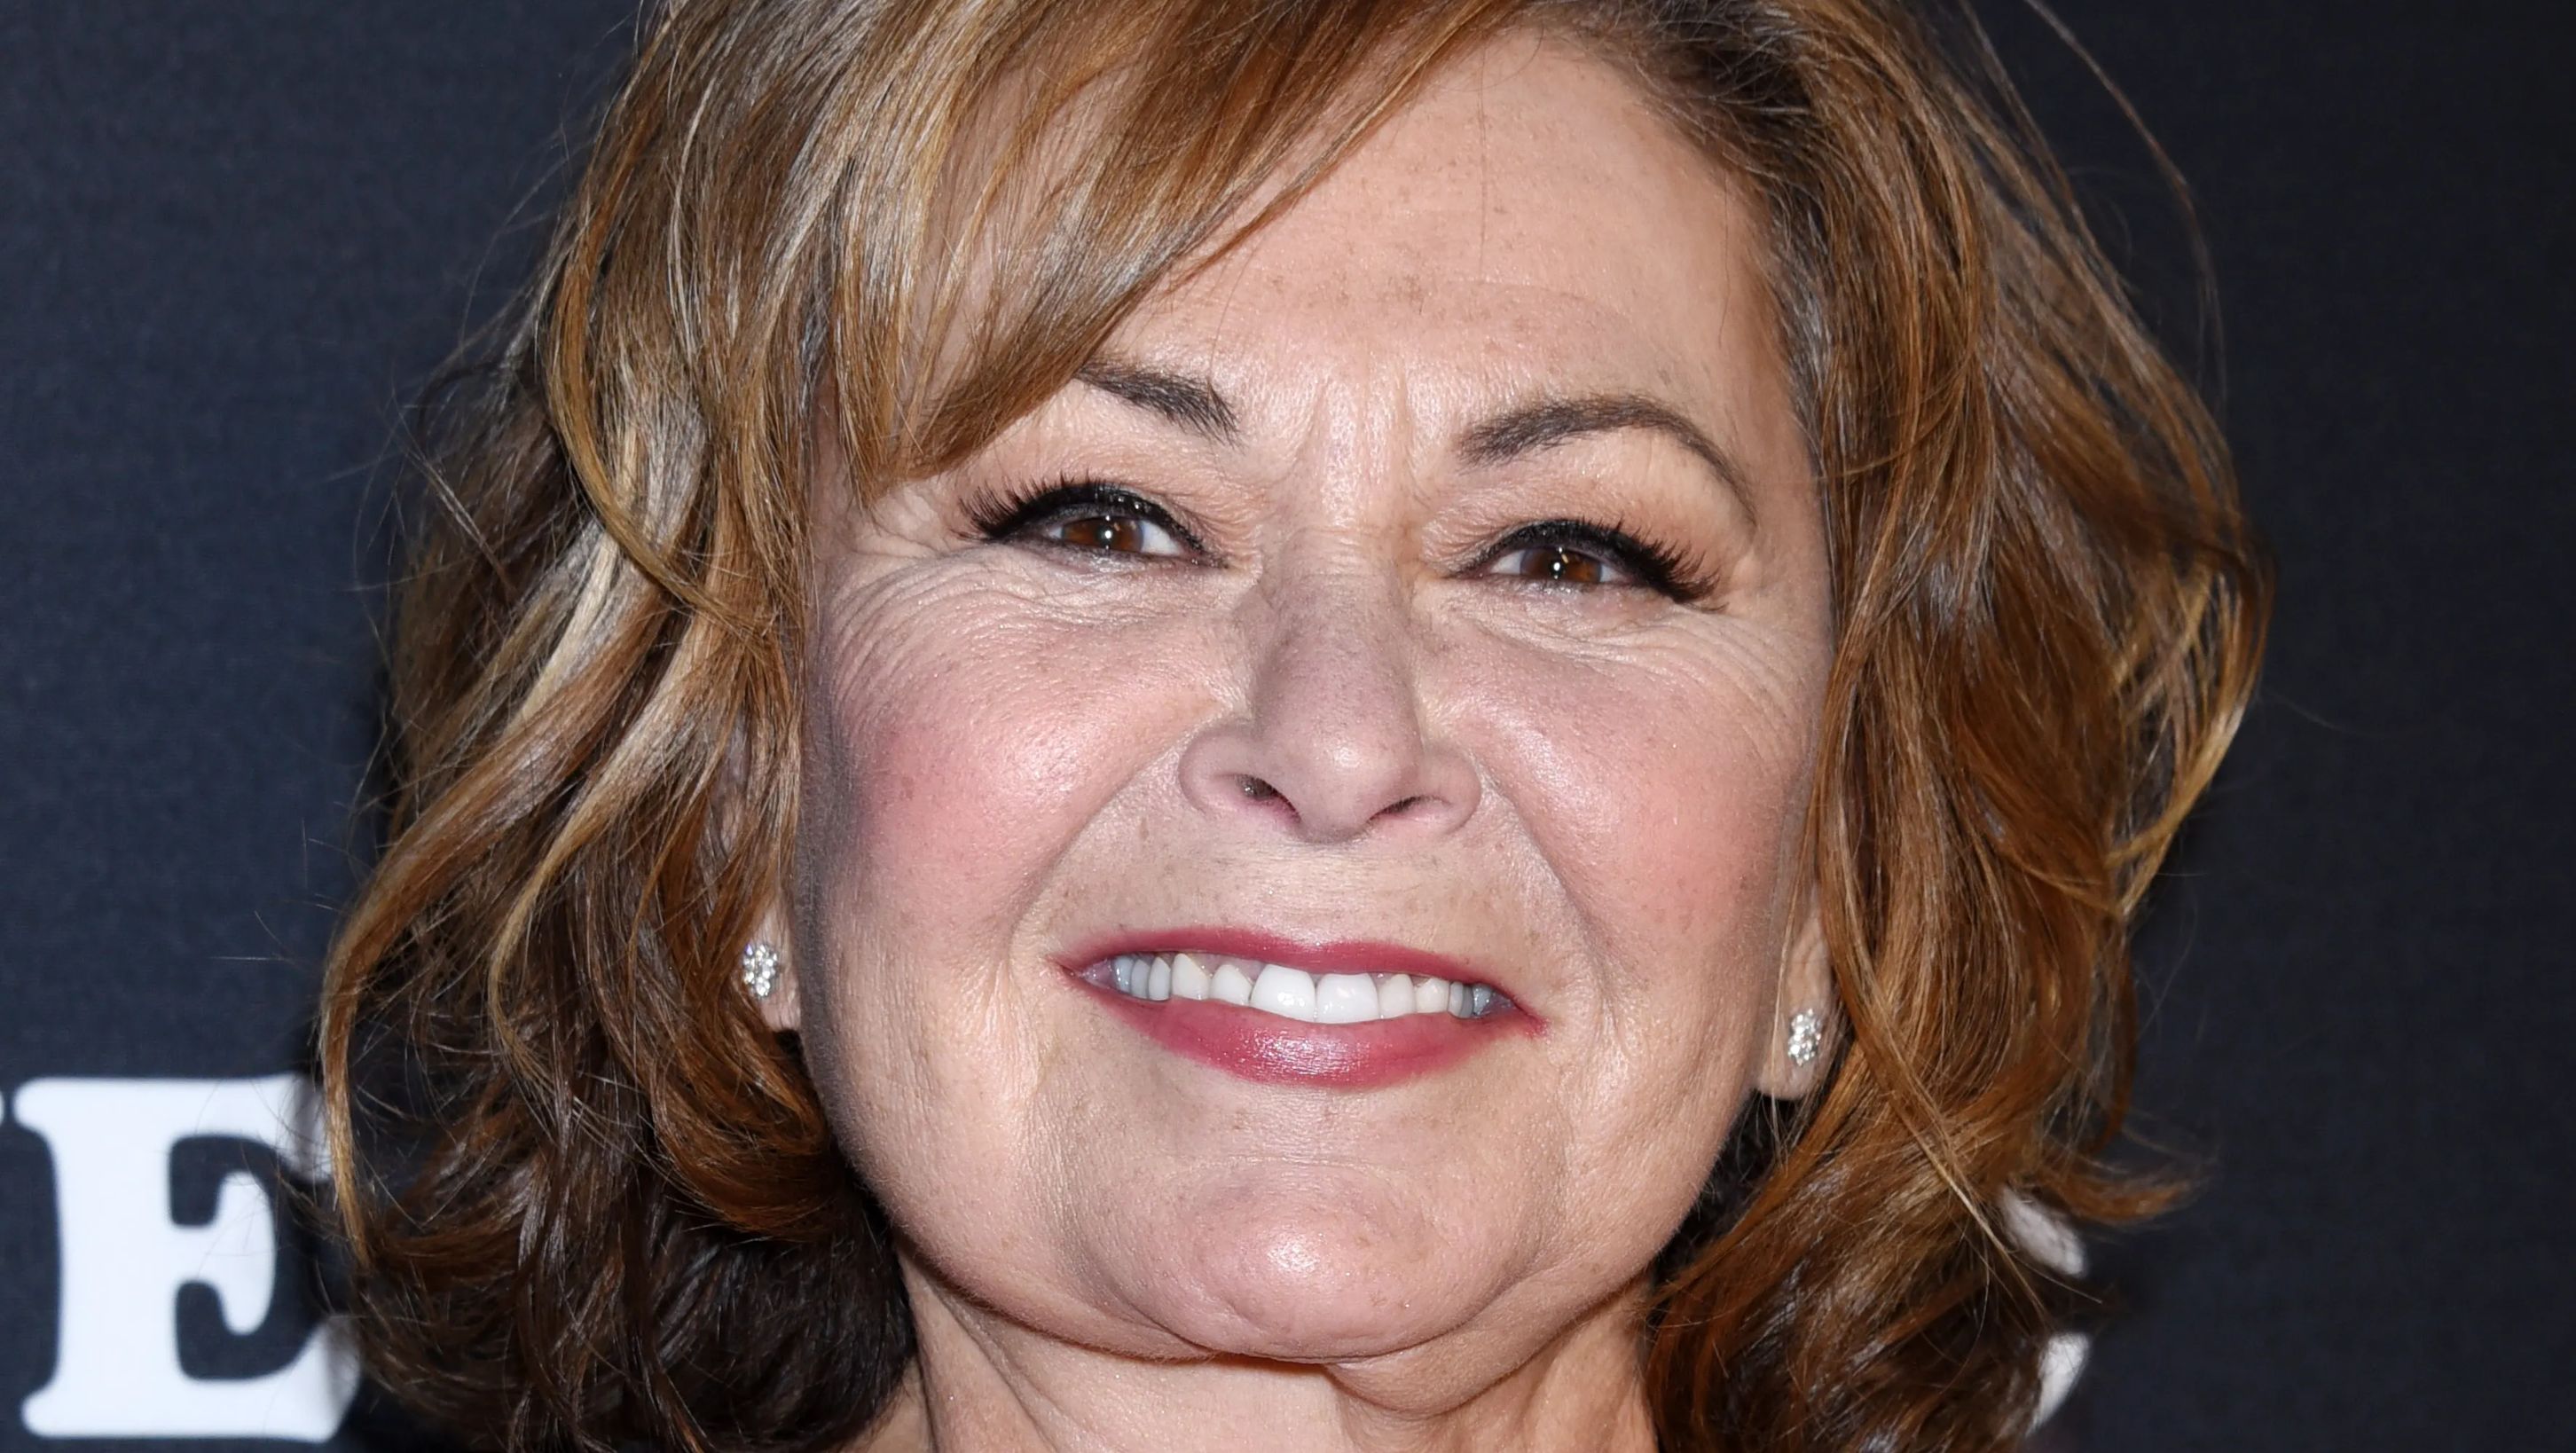 Close-up of Roseanne Barr's face as she smiles on the red carpet at an event. 